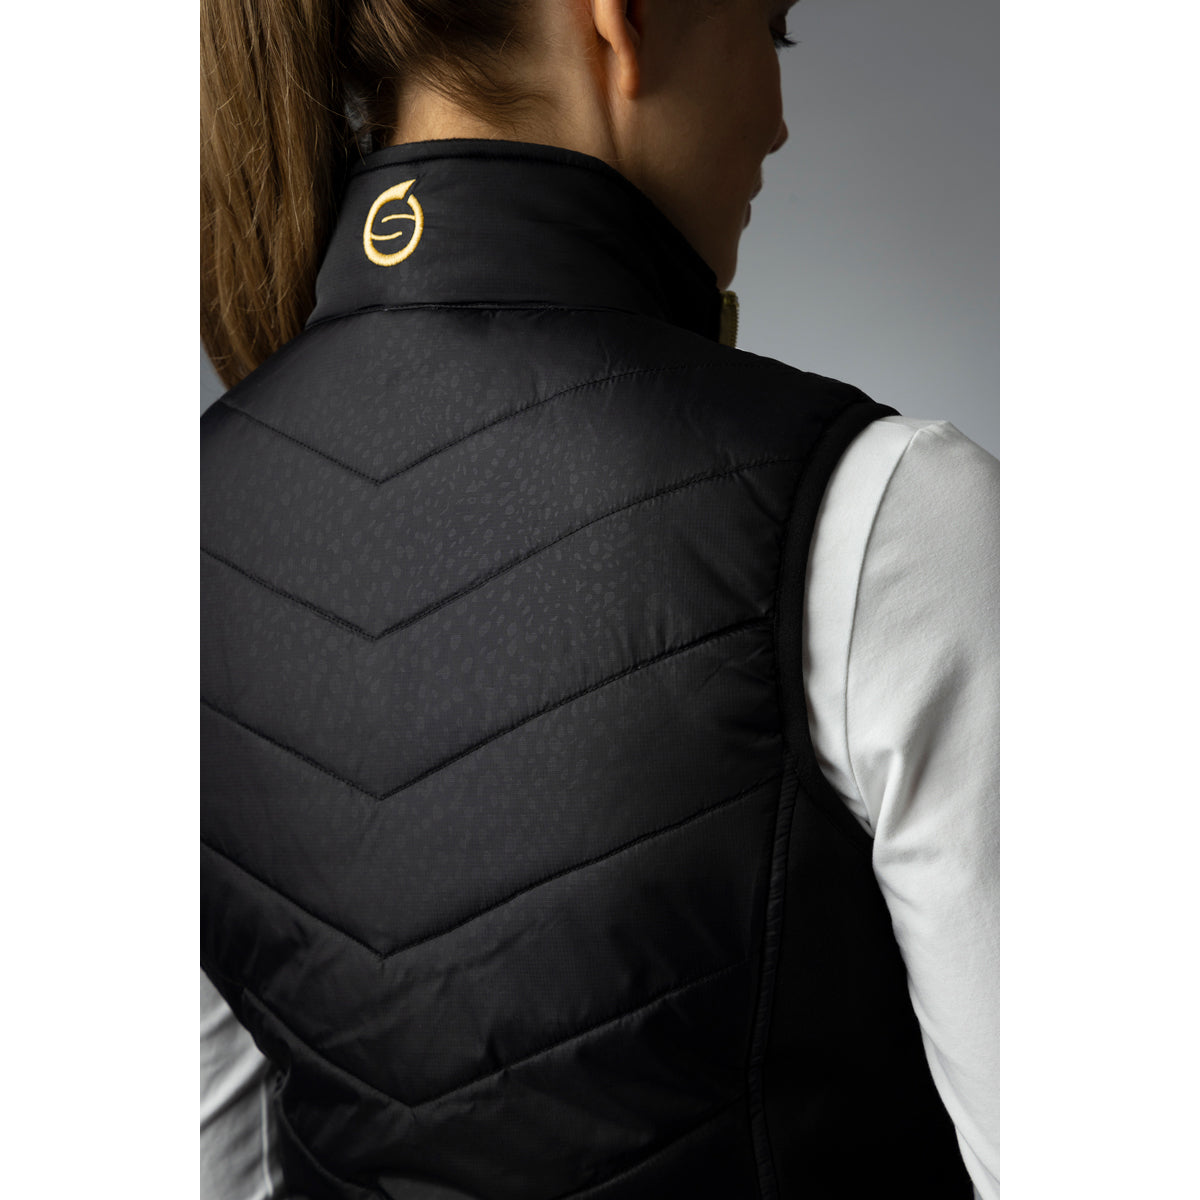 Sunderland Ladies Quilted Gilet in Black Cheetah & Gold - Last One Small Only Left